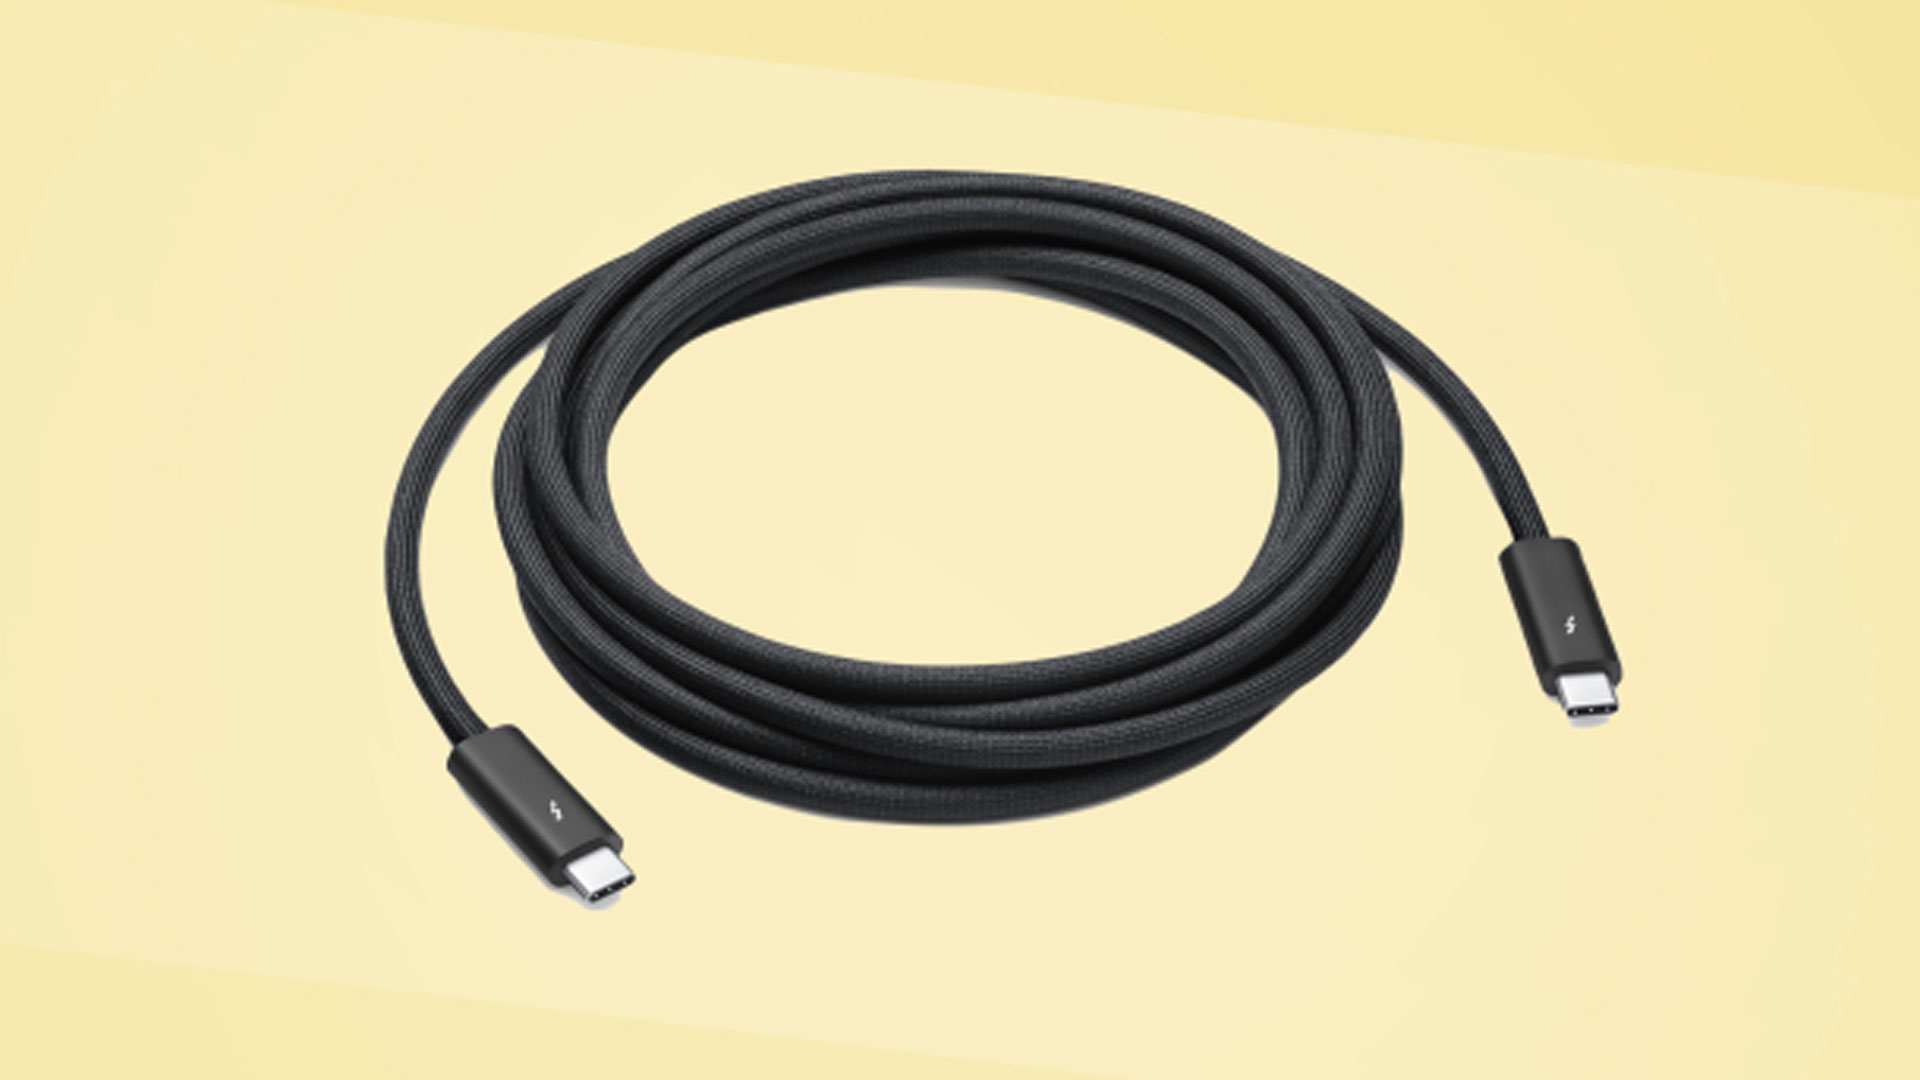 Apple's $159 Thunderbolt 4 Pro Cable is Braided and Three Meters Long qqcEcvAevQ94jPbpdrwFeR